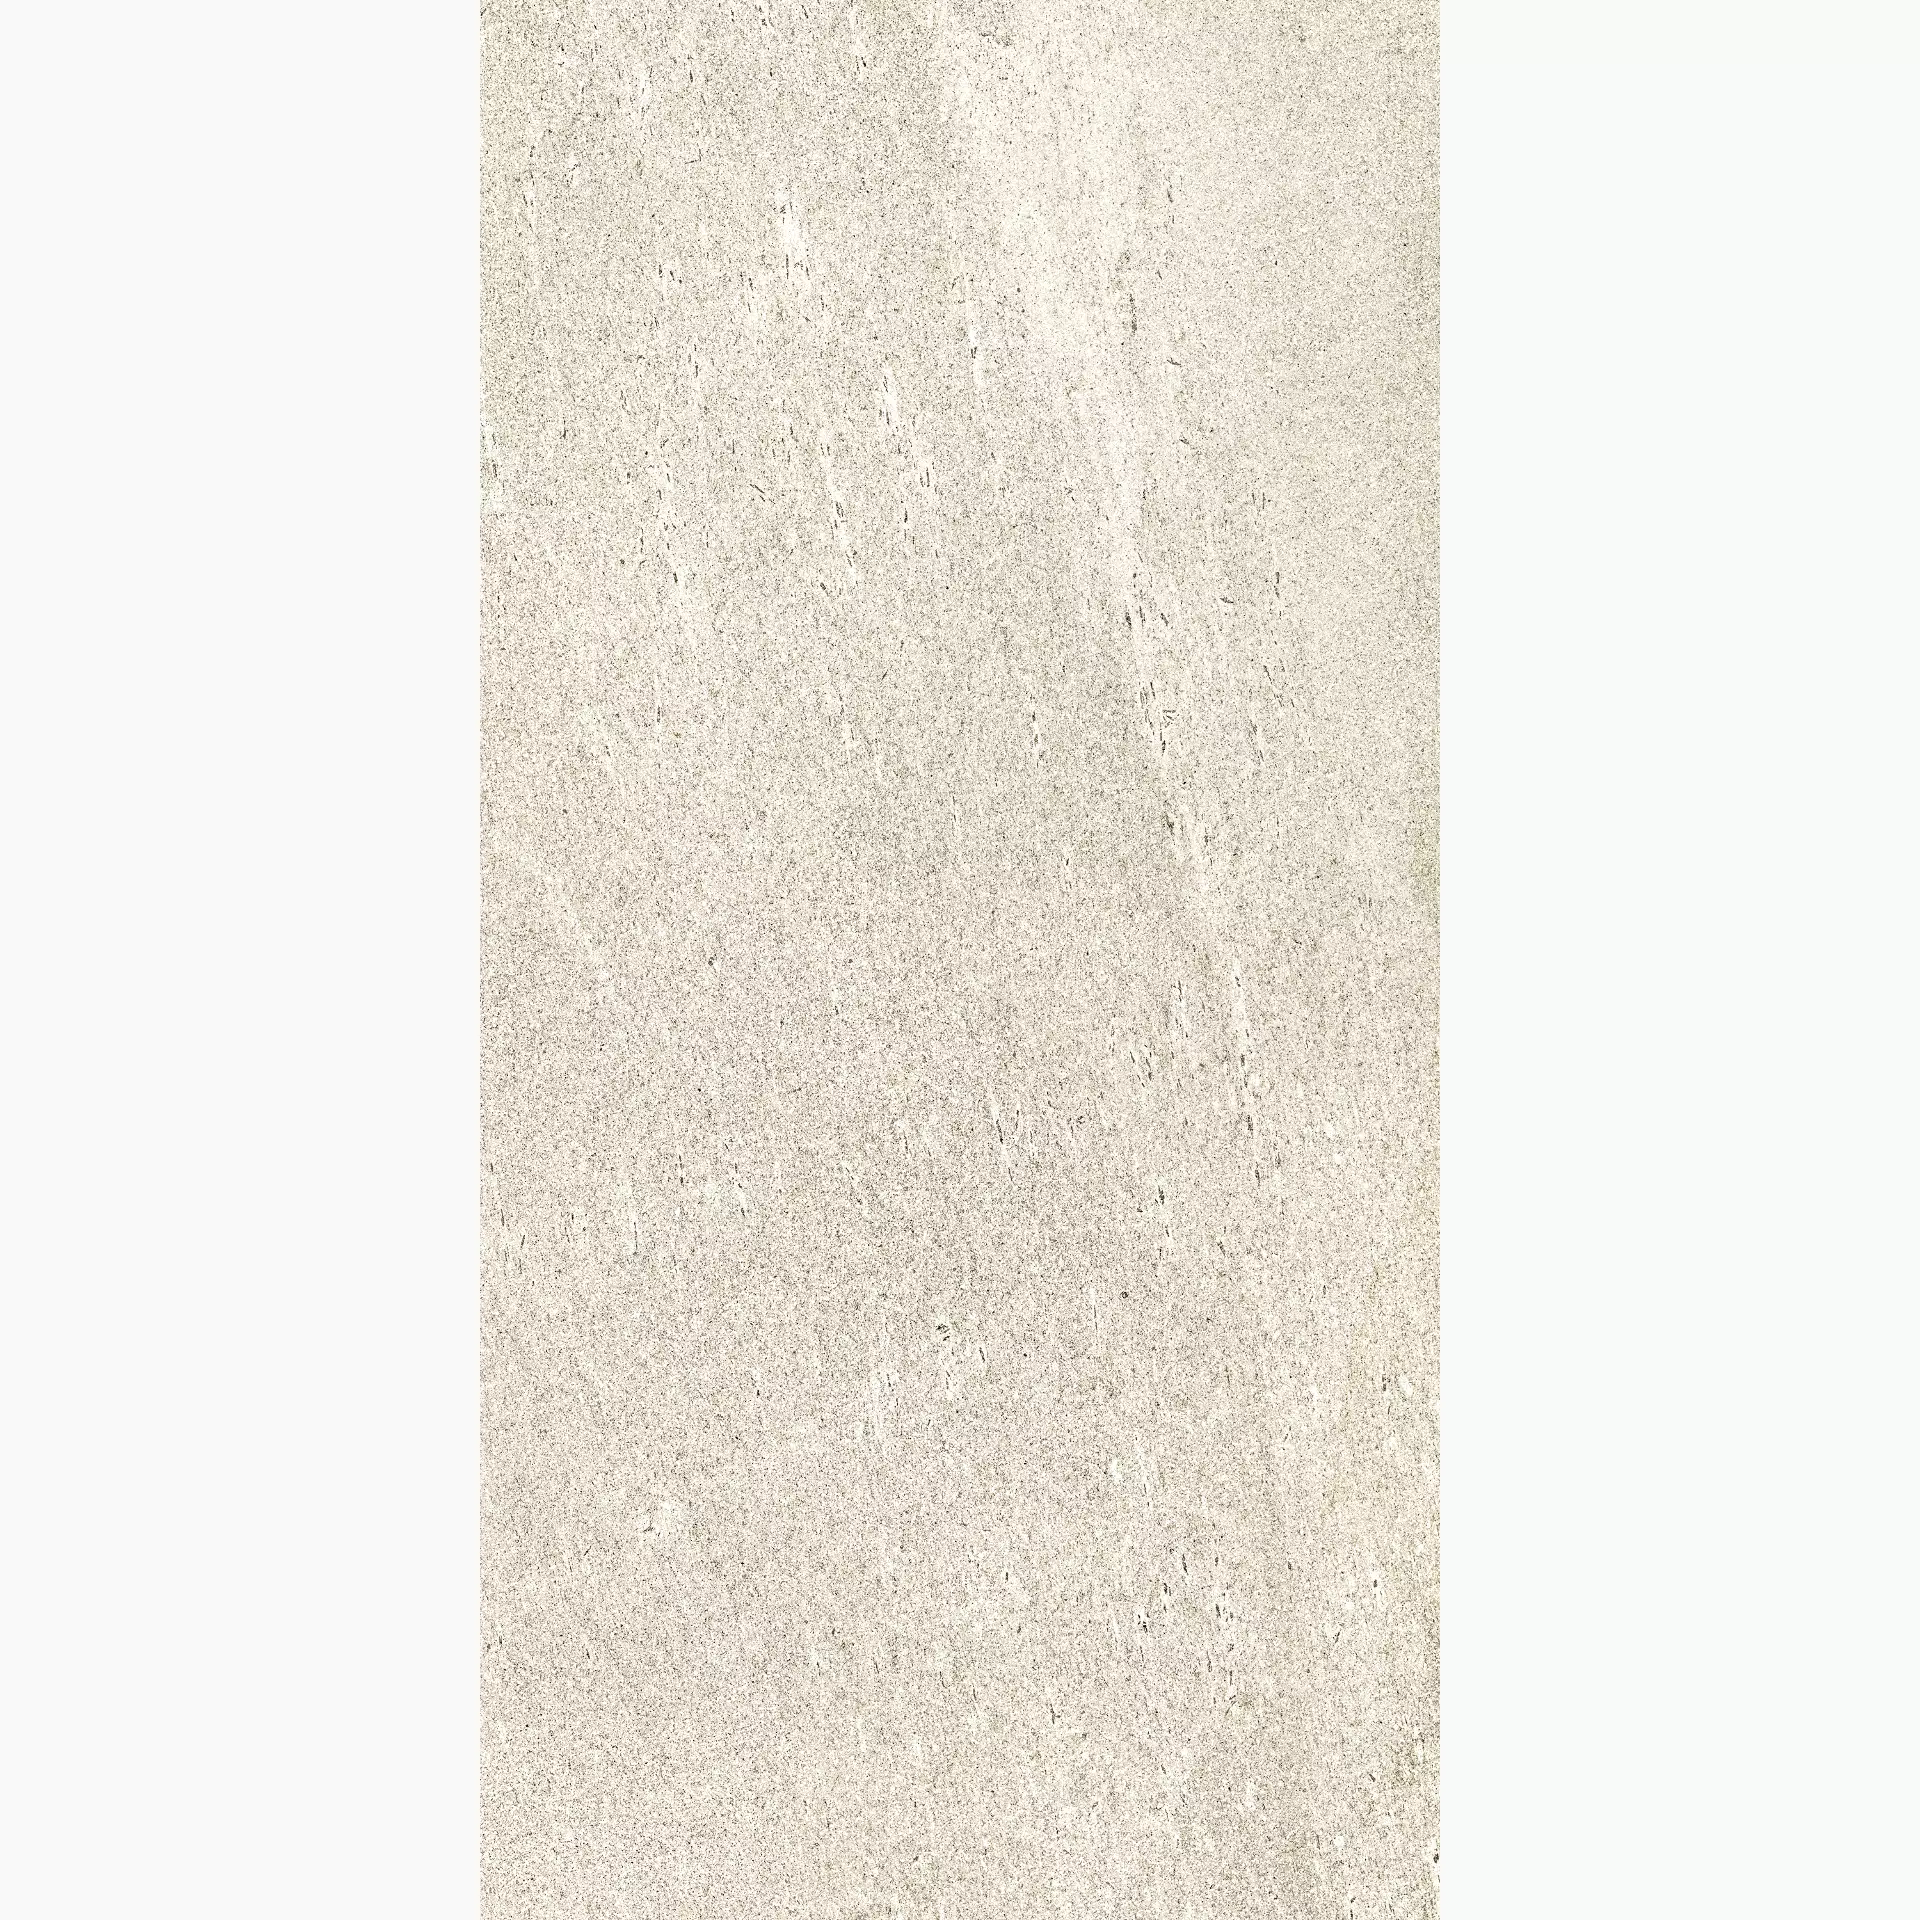 Cottodeste Blend Stone Clear Hammered Protect EGXBS50 60x120cm rectified 20mm